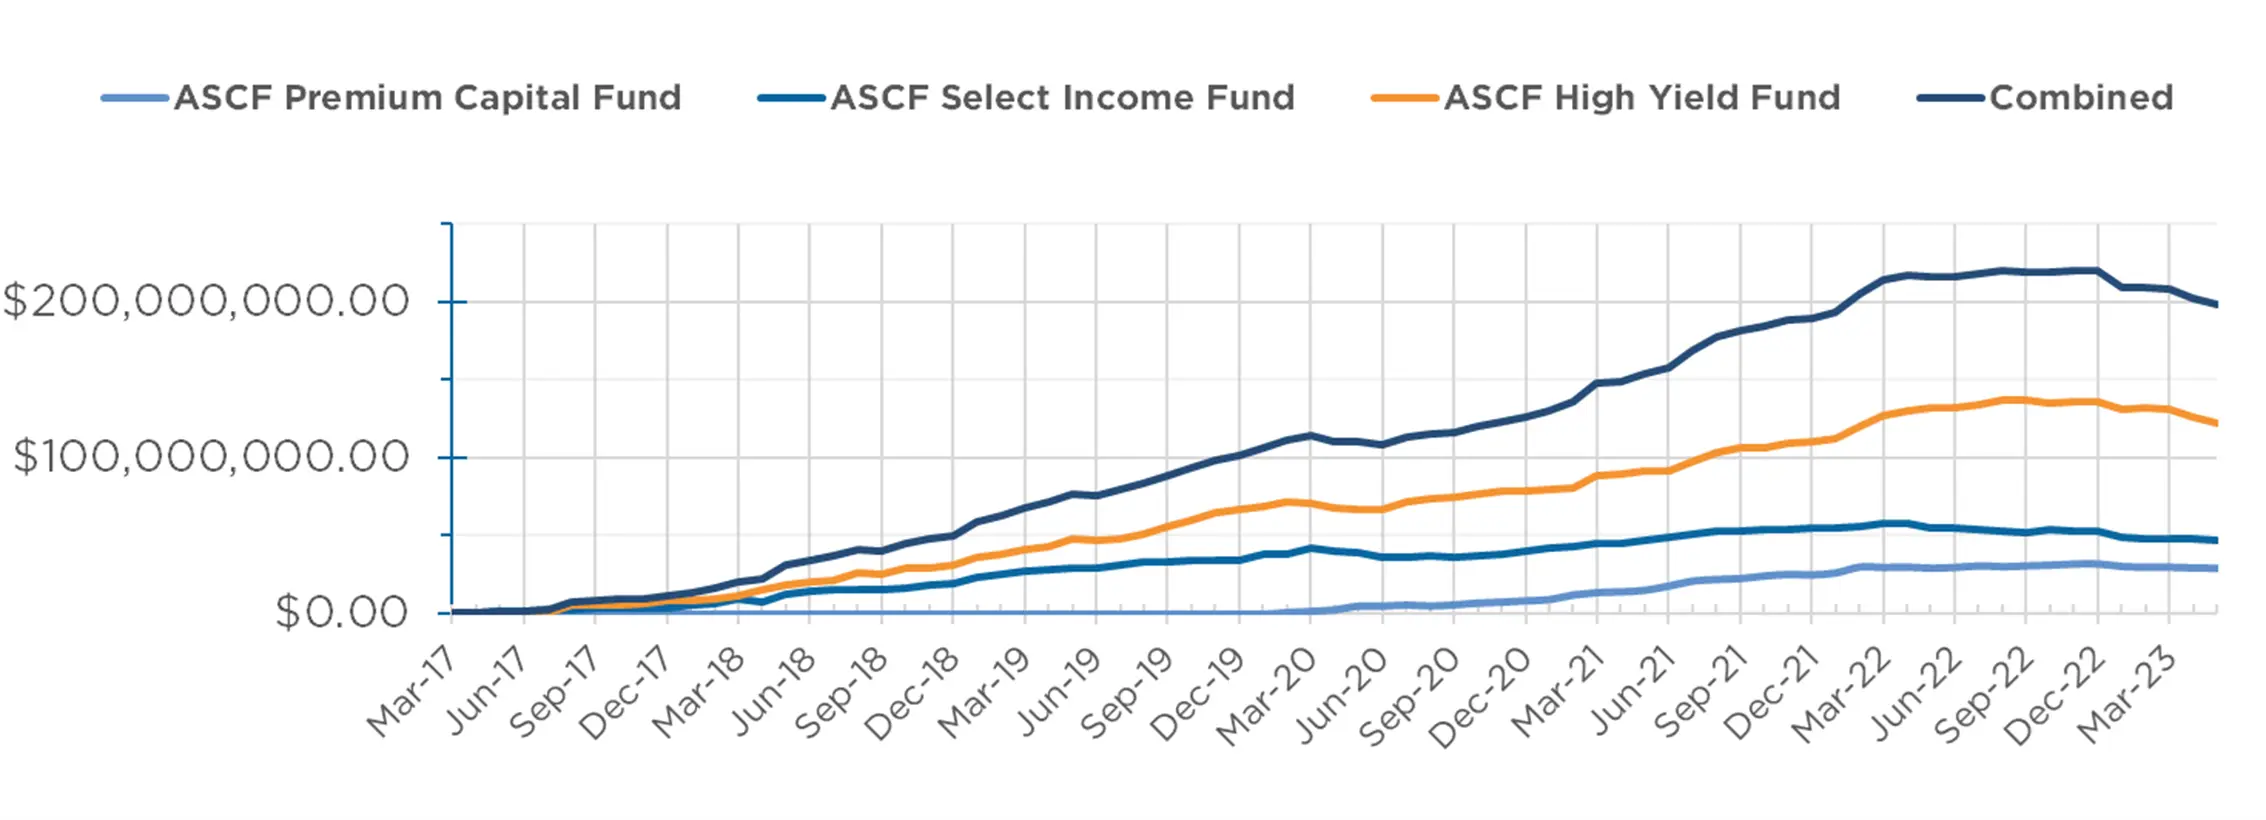 ASCF's Monthly managed funds under management.